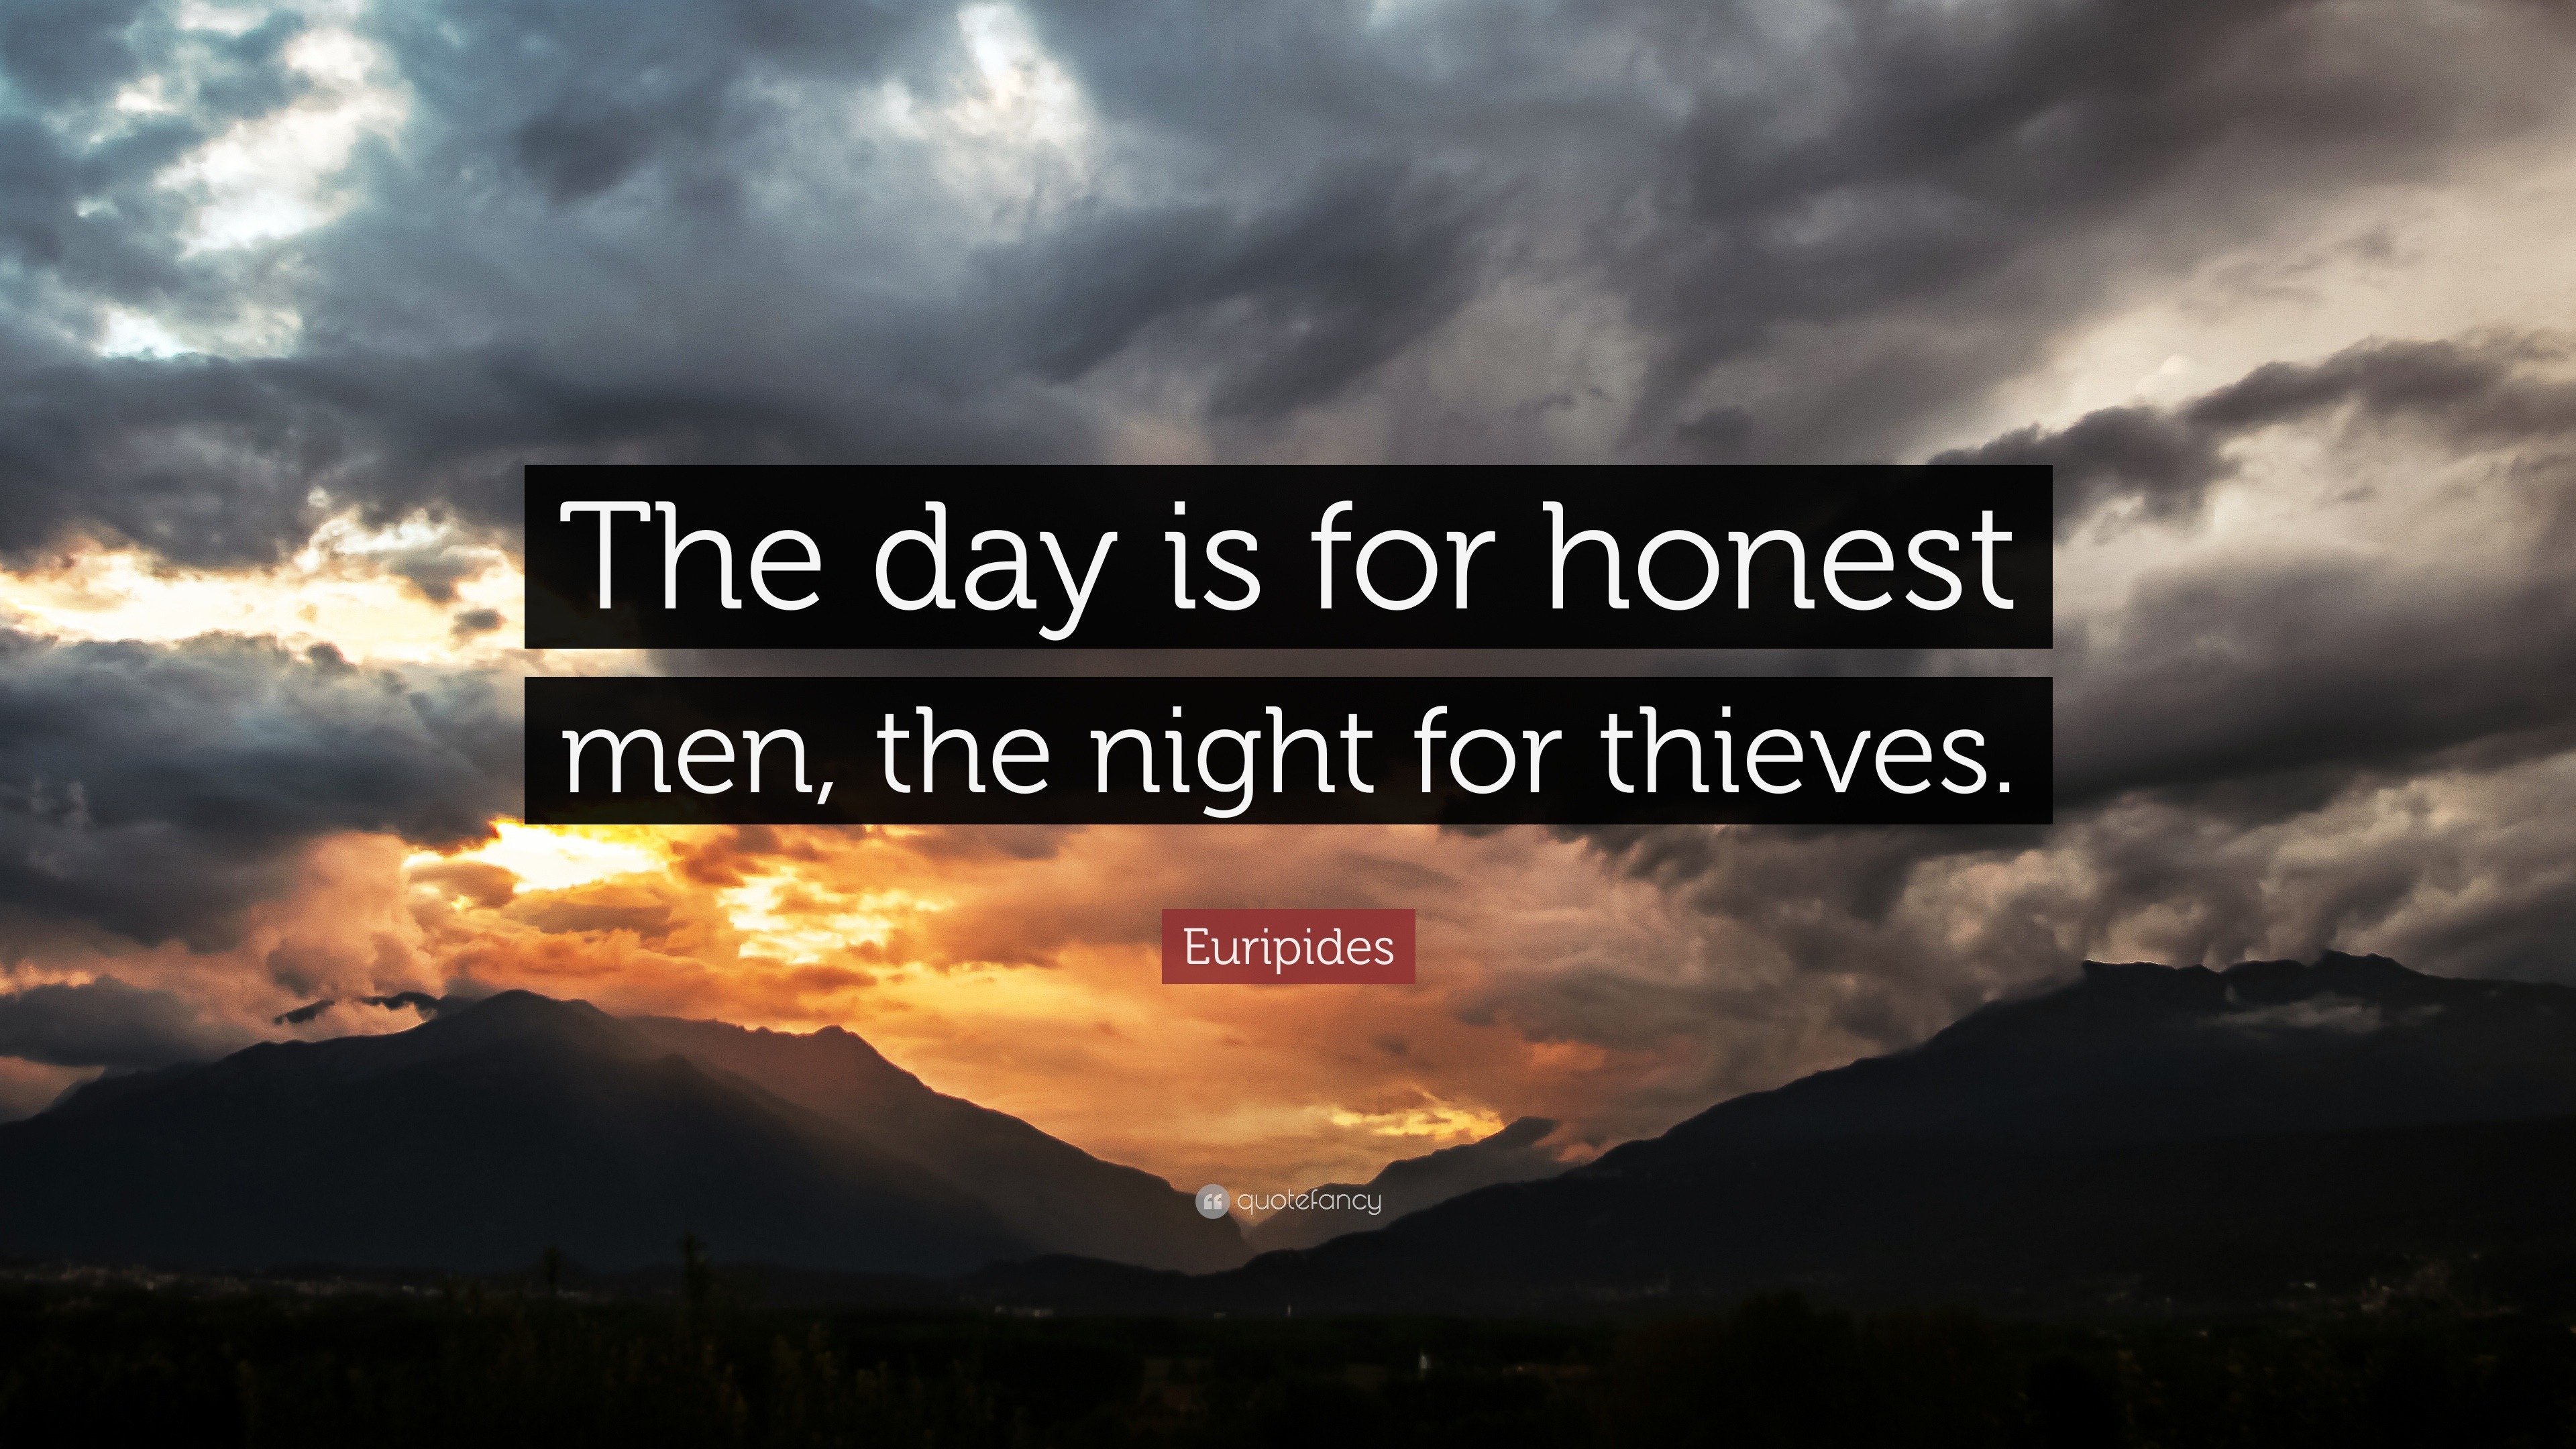 https://quotefancy.com/media/wallpaper/3840x2160/1952487-Euripides-Quote-The-day-is-for-honest-men-the-night-for-thieves.jpg